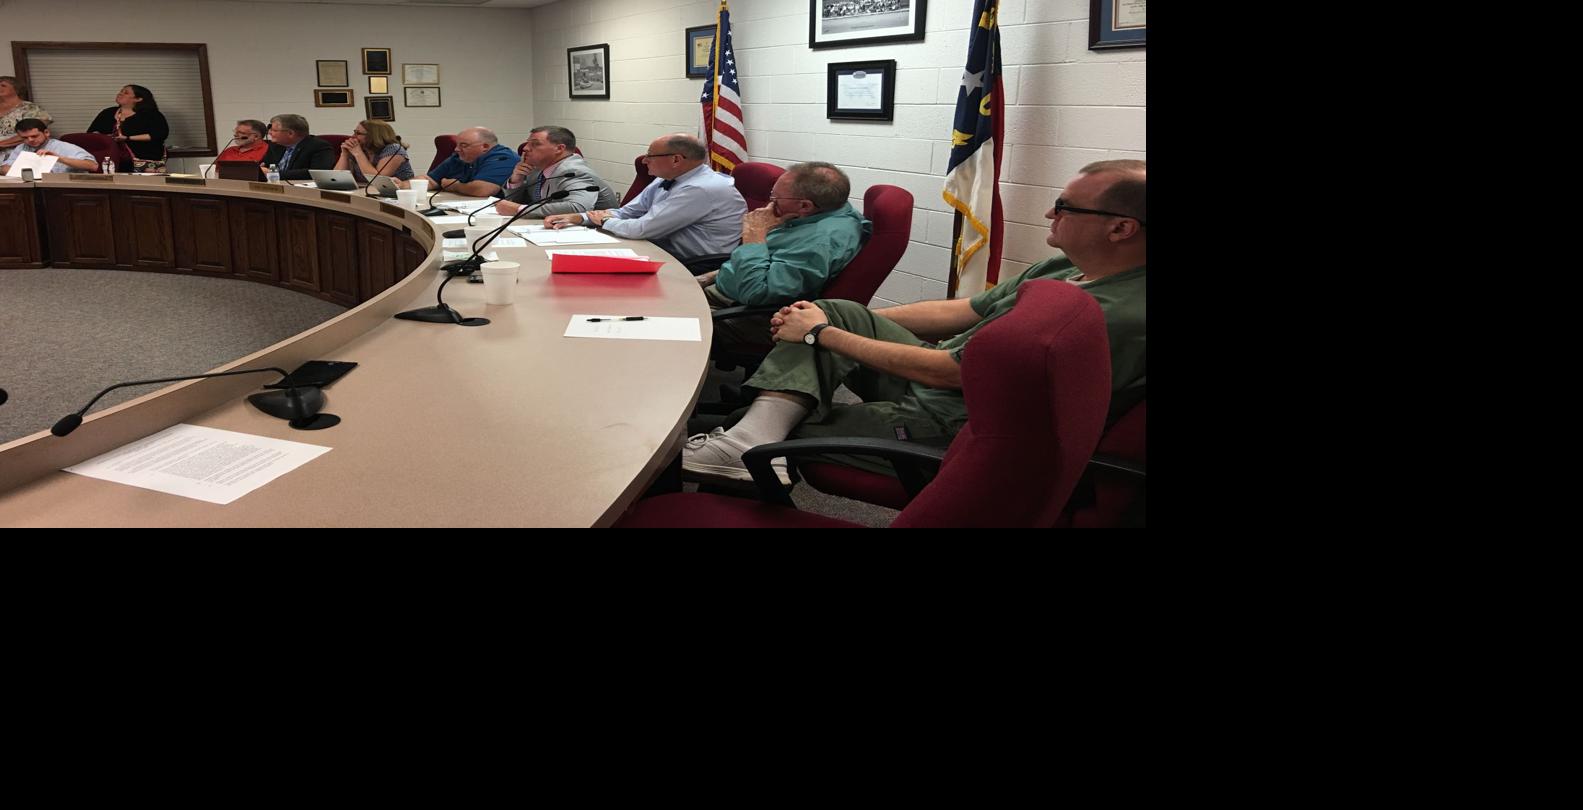 McDowell County Board of Education: Bids approved for new roofs on 3